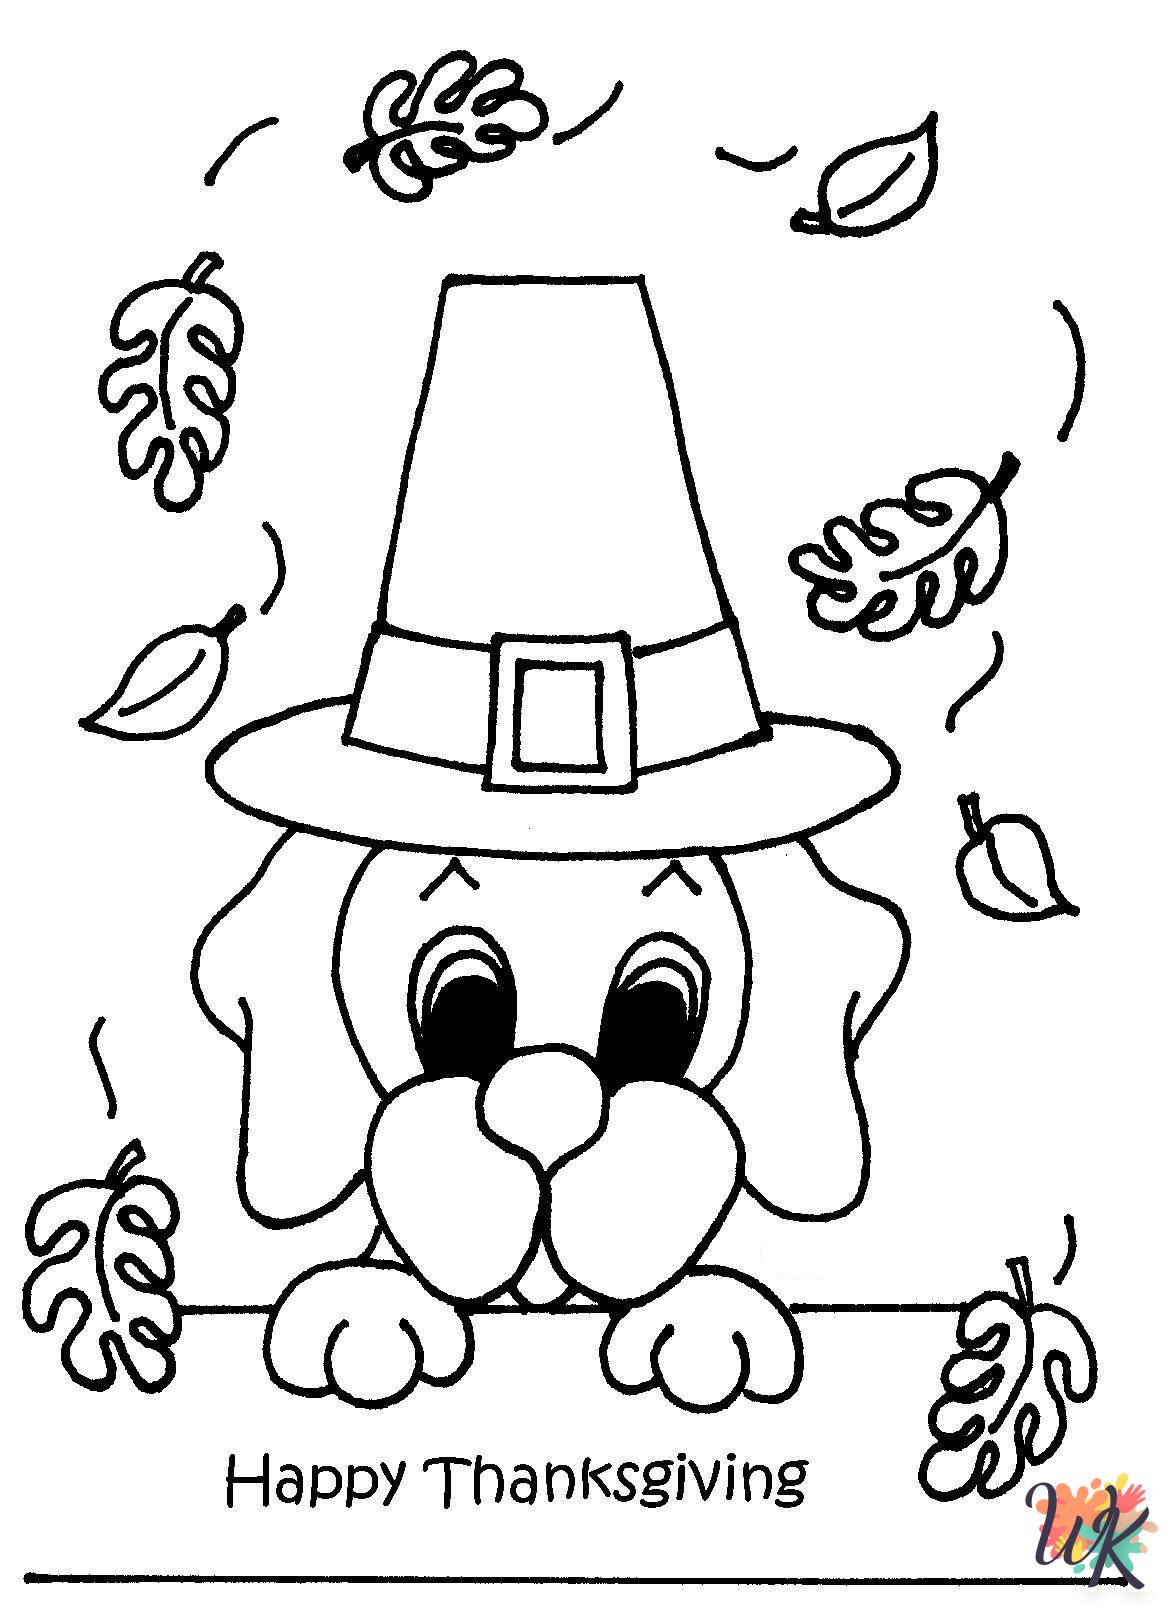 old-fashioned November coloring pages